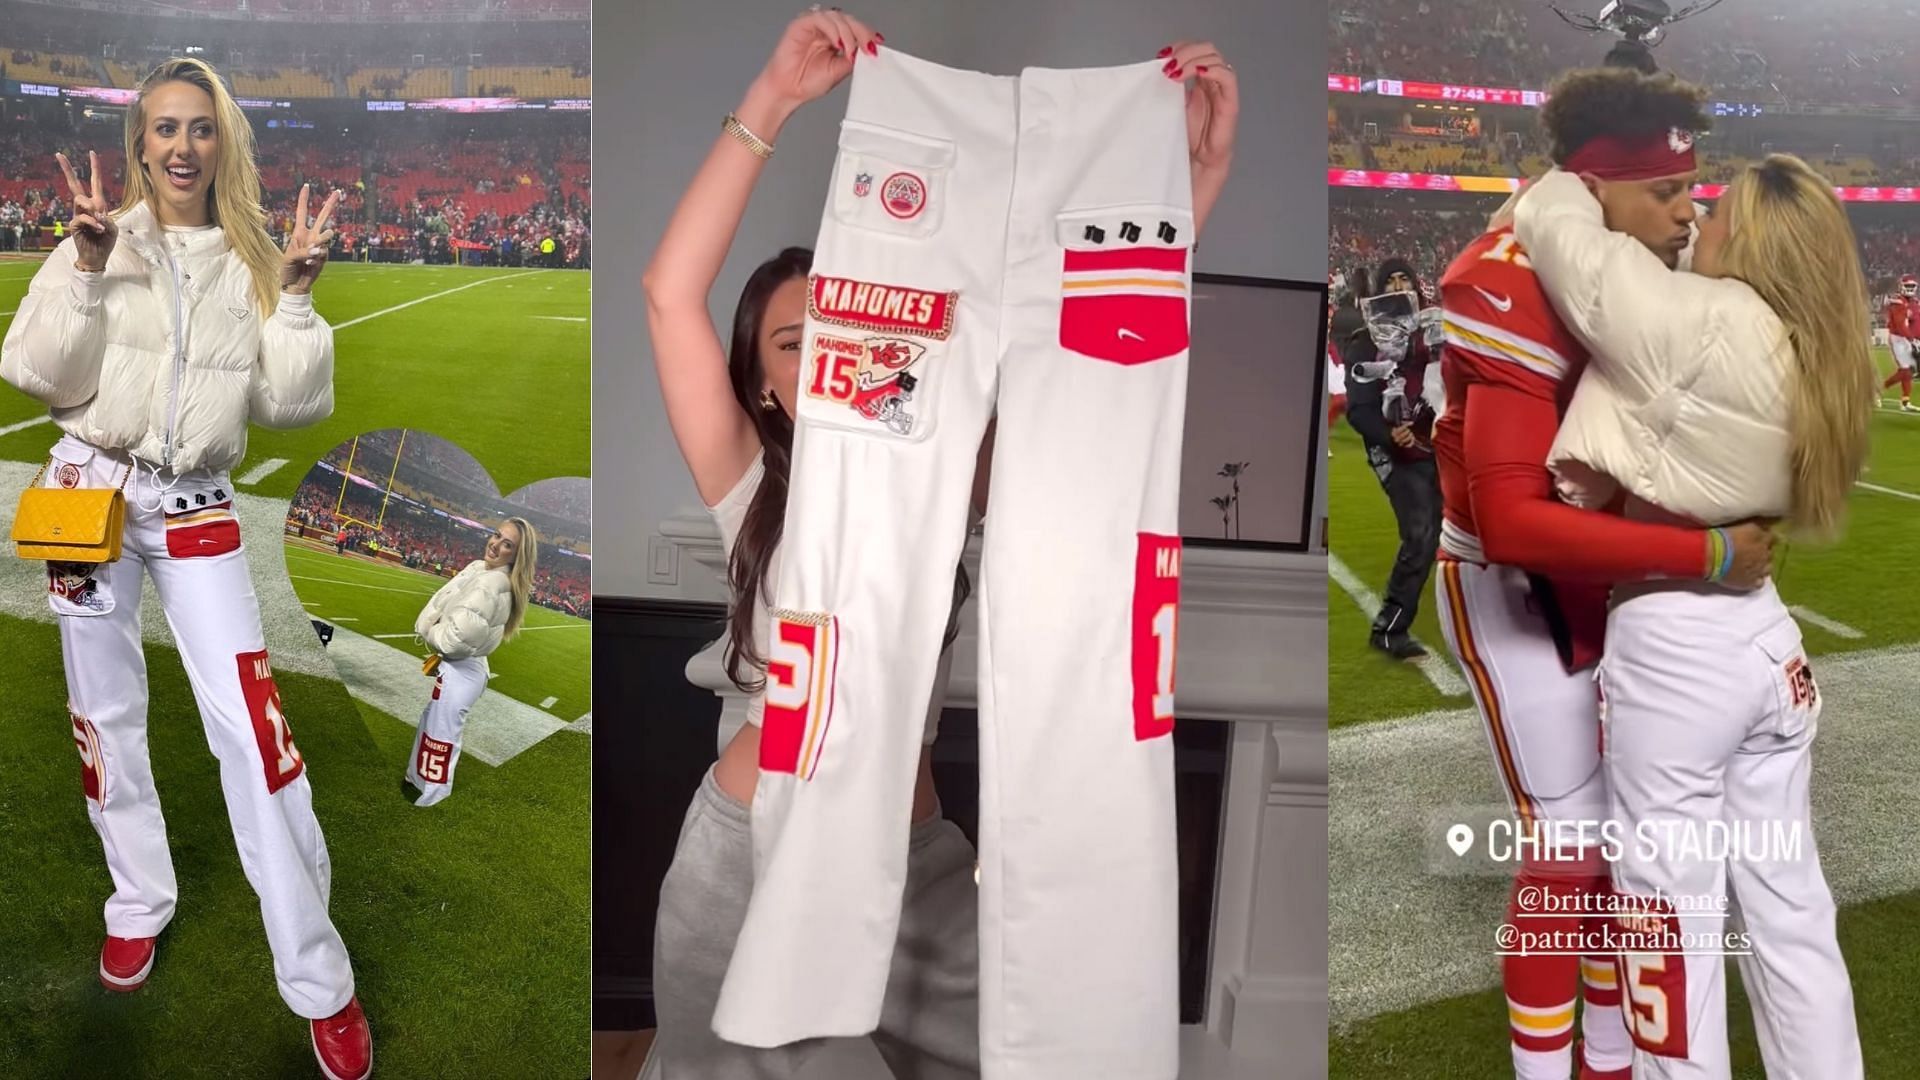 Brittany Mahomes wore custom-made pants during the Kansas City Chiefs